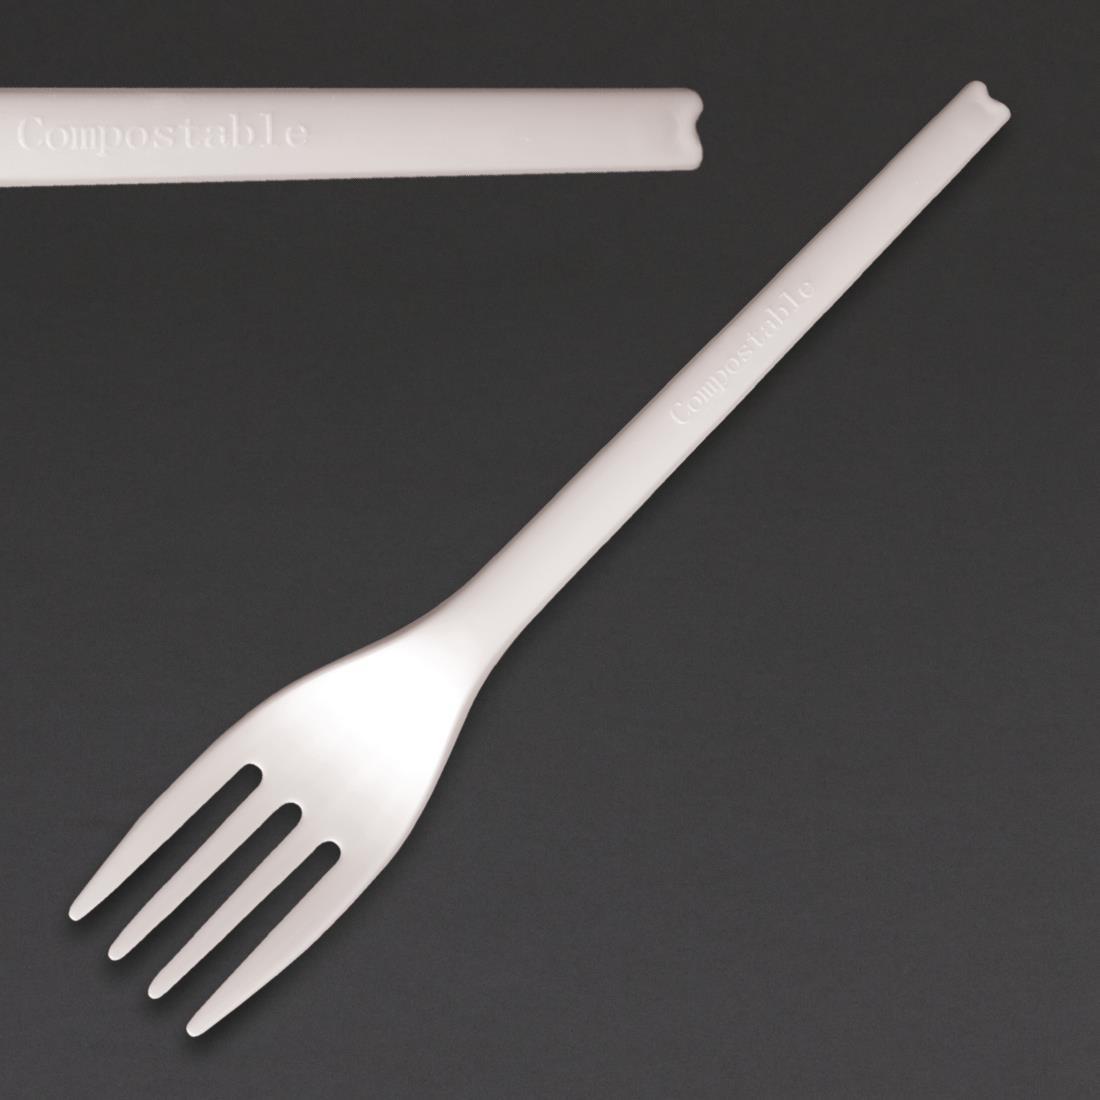 Fiesta Green Compostable CPLA Forks White (Pack of 100) - DJ704  - 1